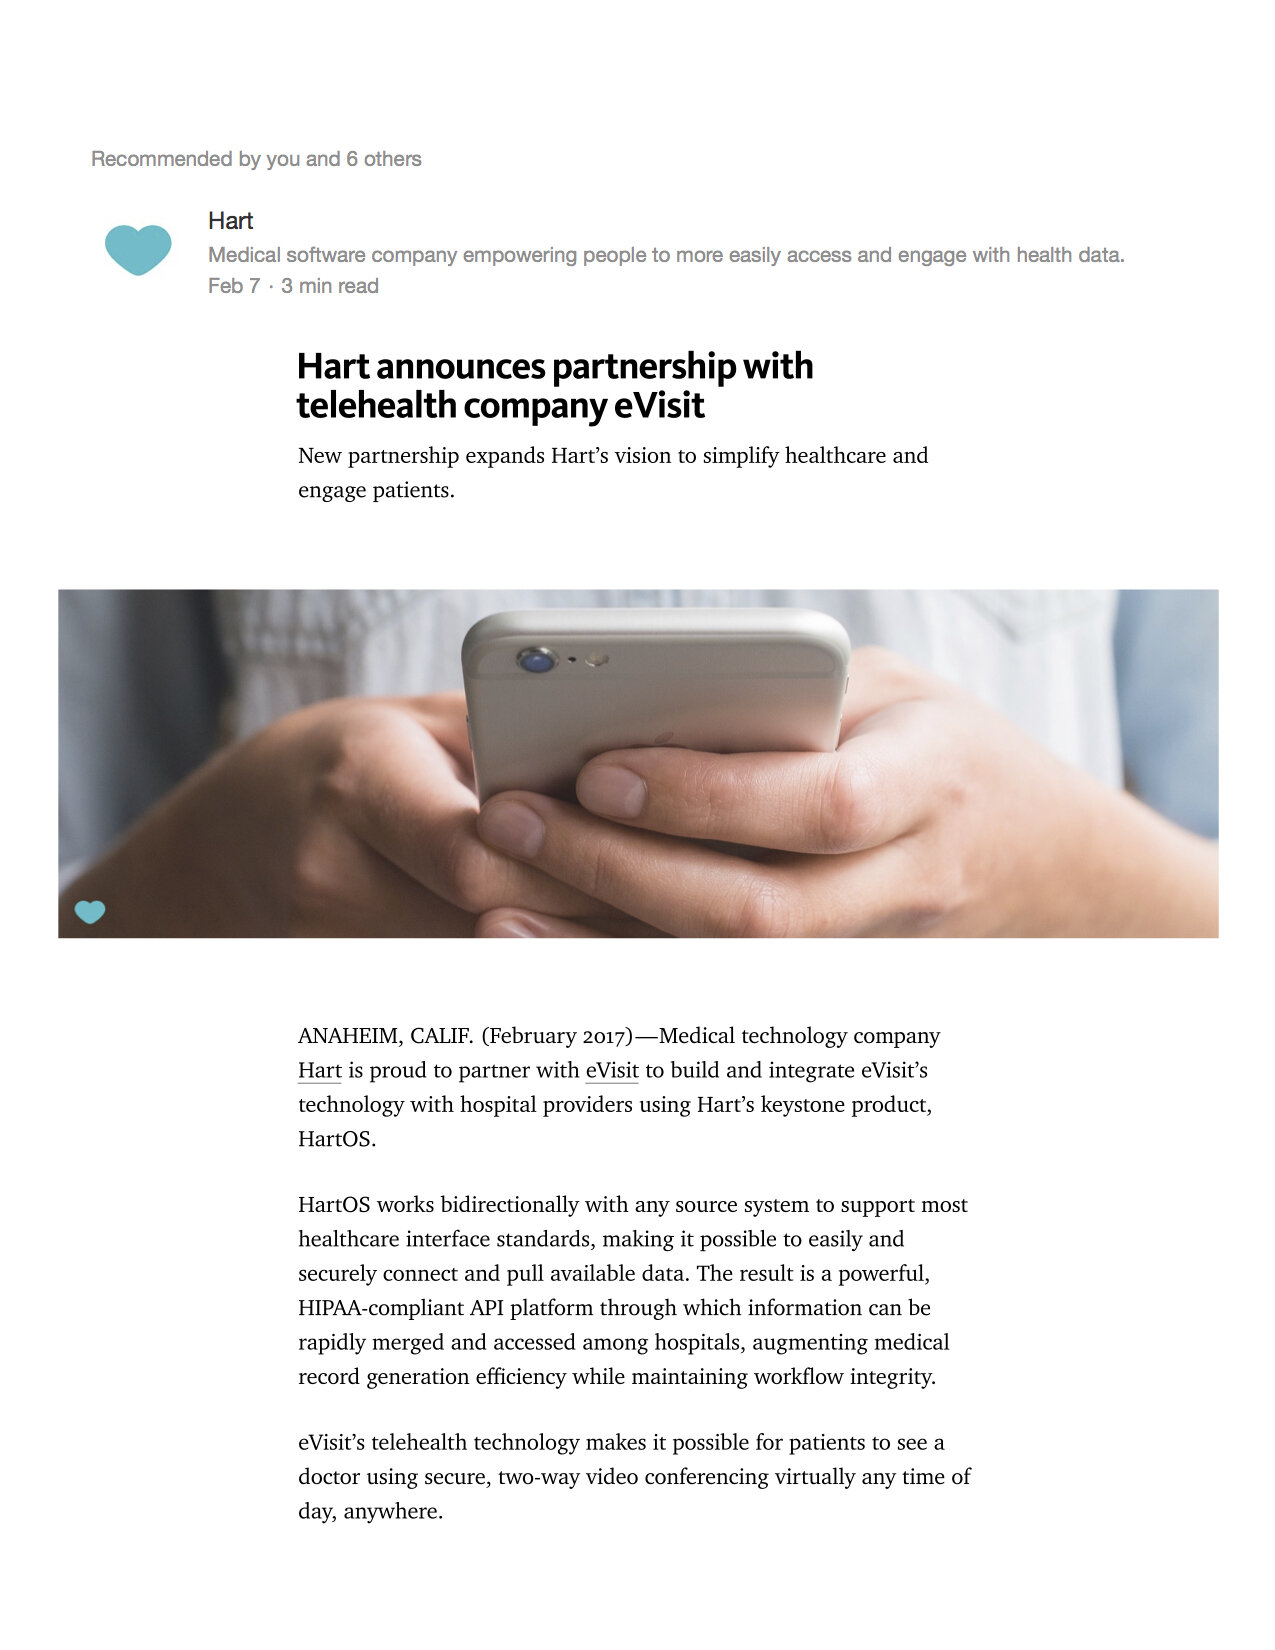 Hart announces partnership with telehealth company eVisit_page 1.jpg